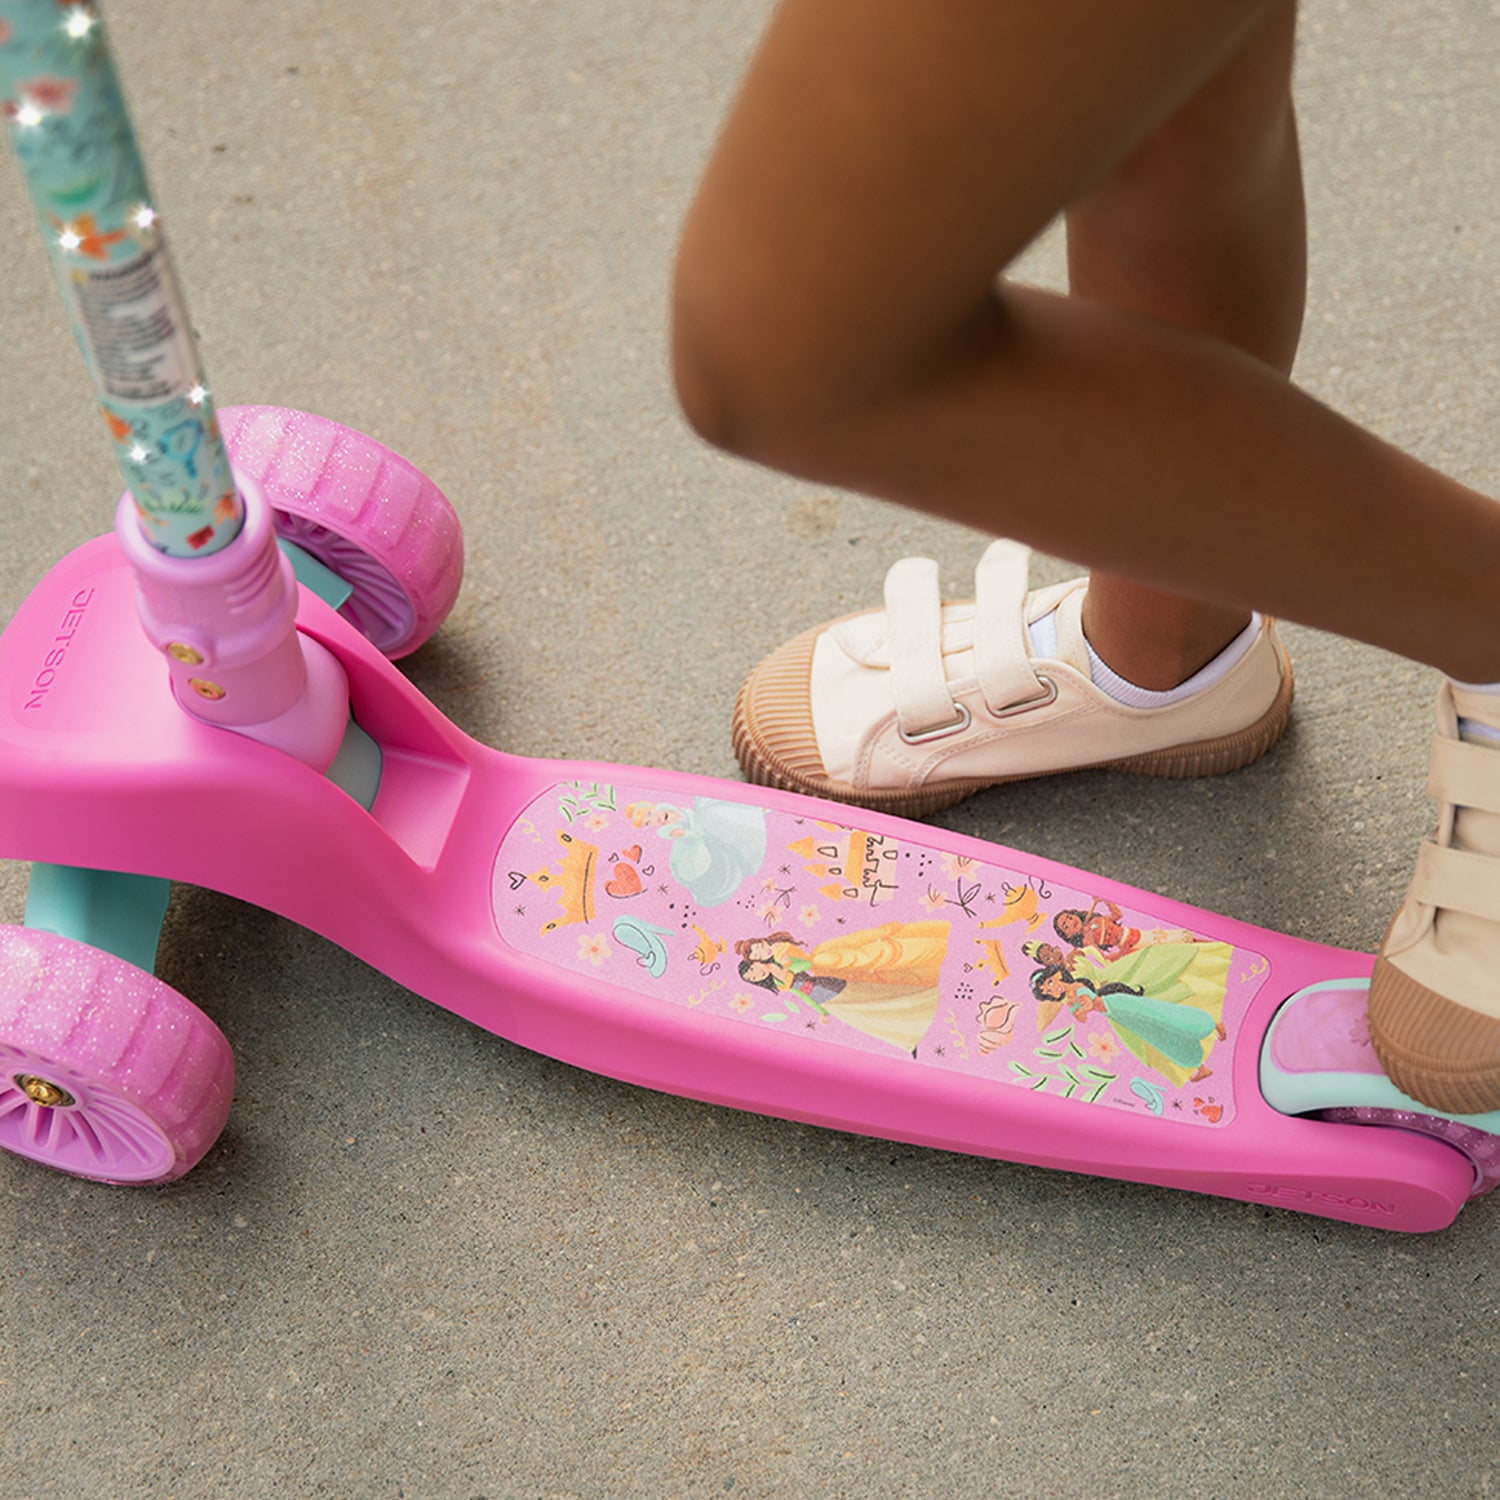 close up of the scooter deck featuring Disney princesses